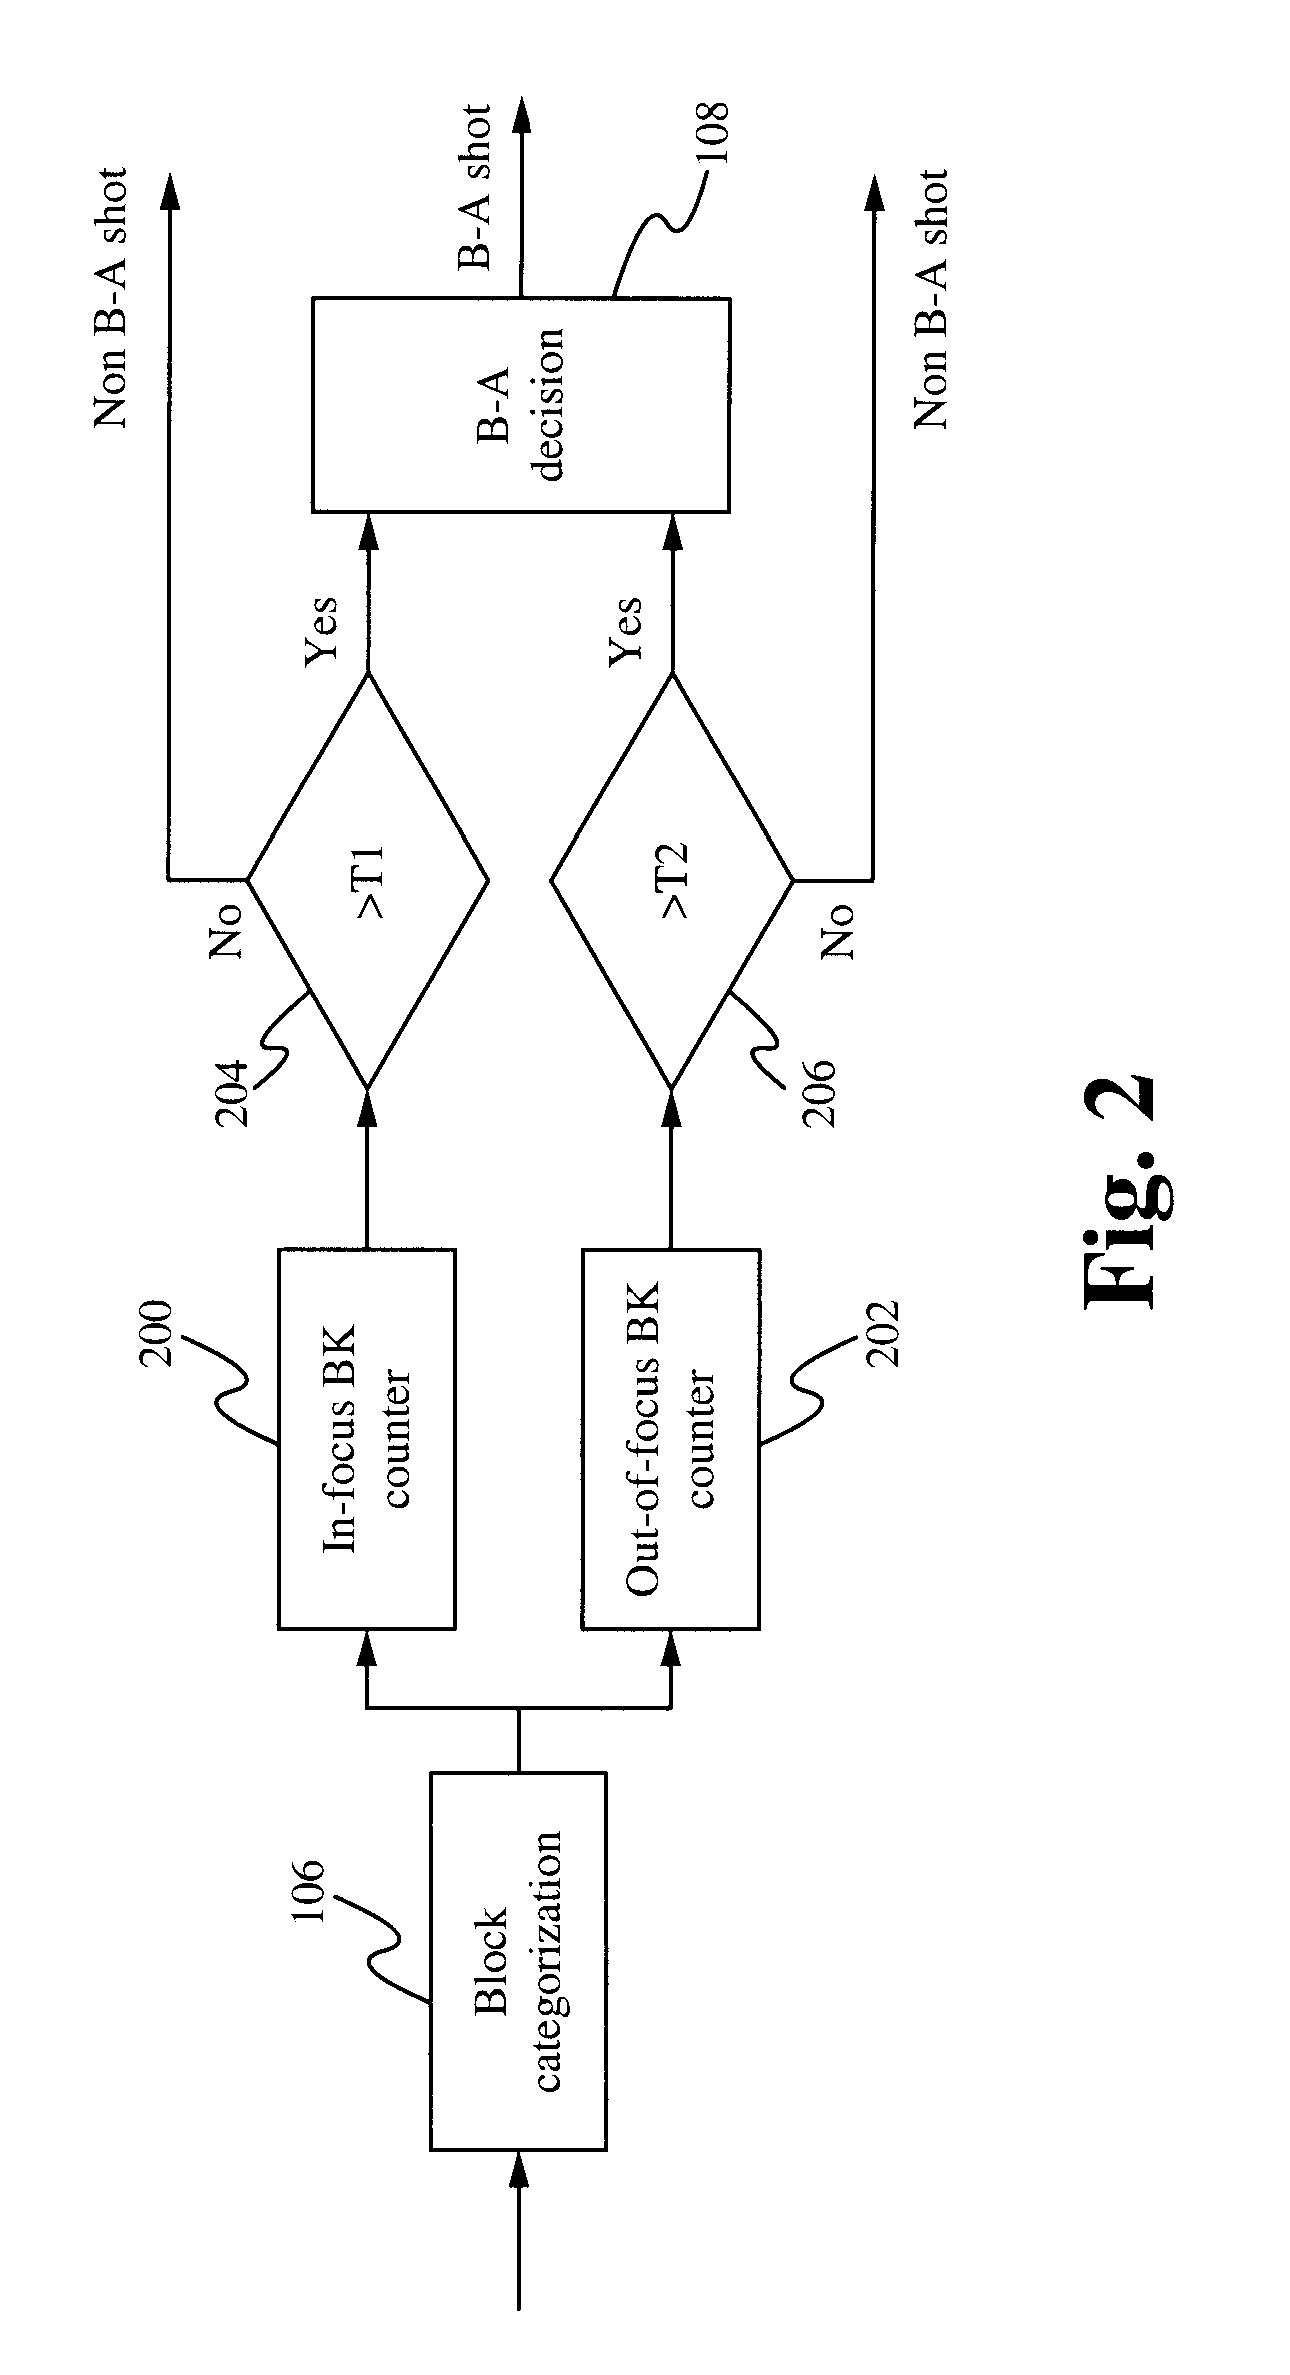 System and method for "bokeh-aji" shot detection and region of interest isolation